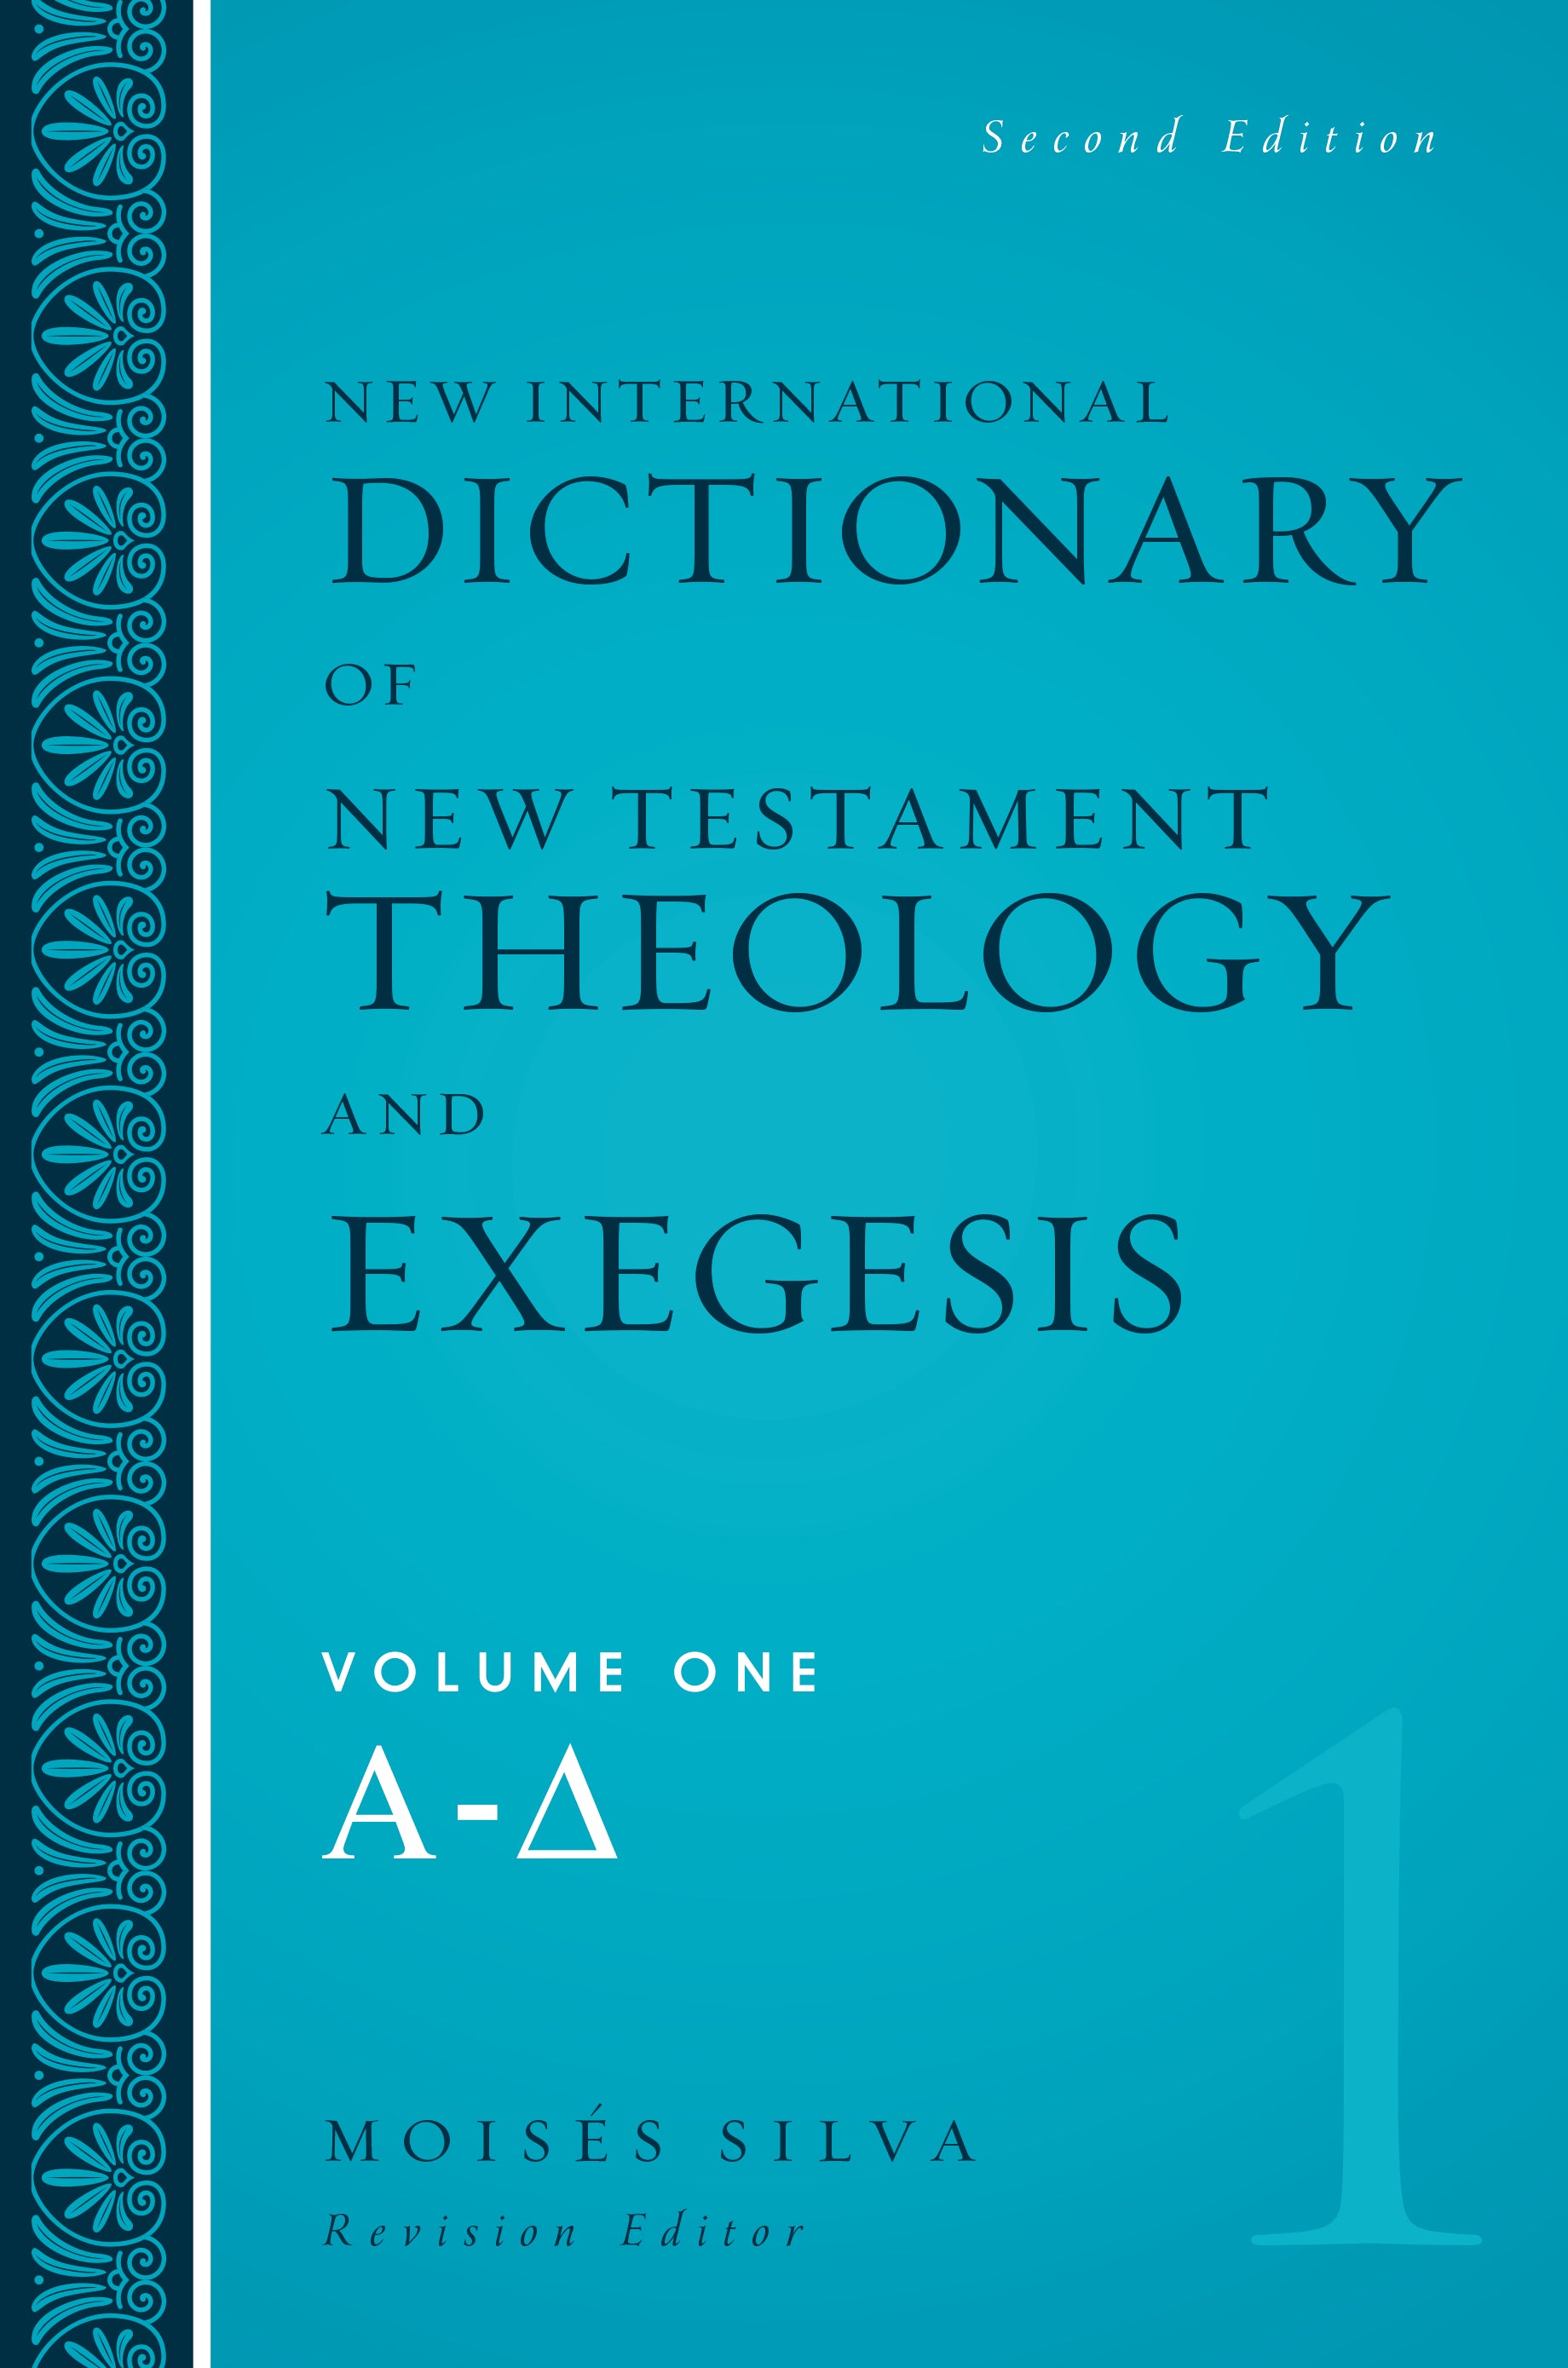 New International Dictionary Of New Testament Theology And Exegesis Se